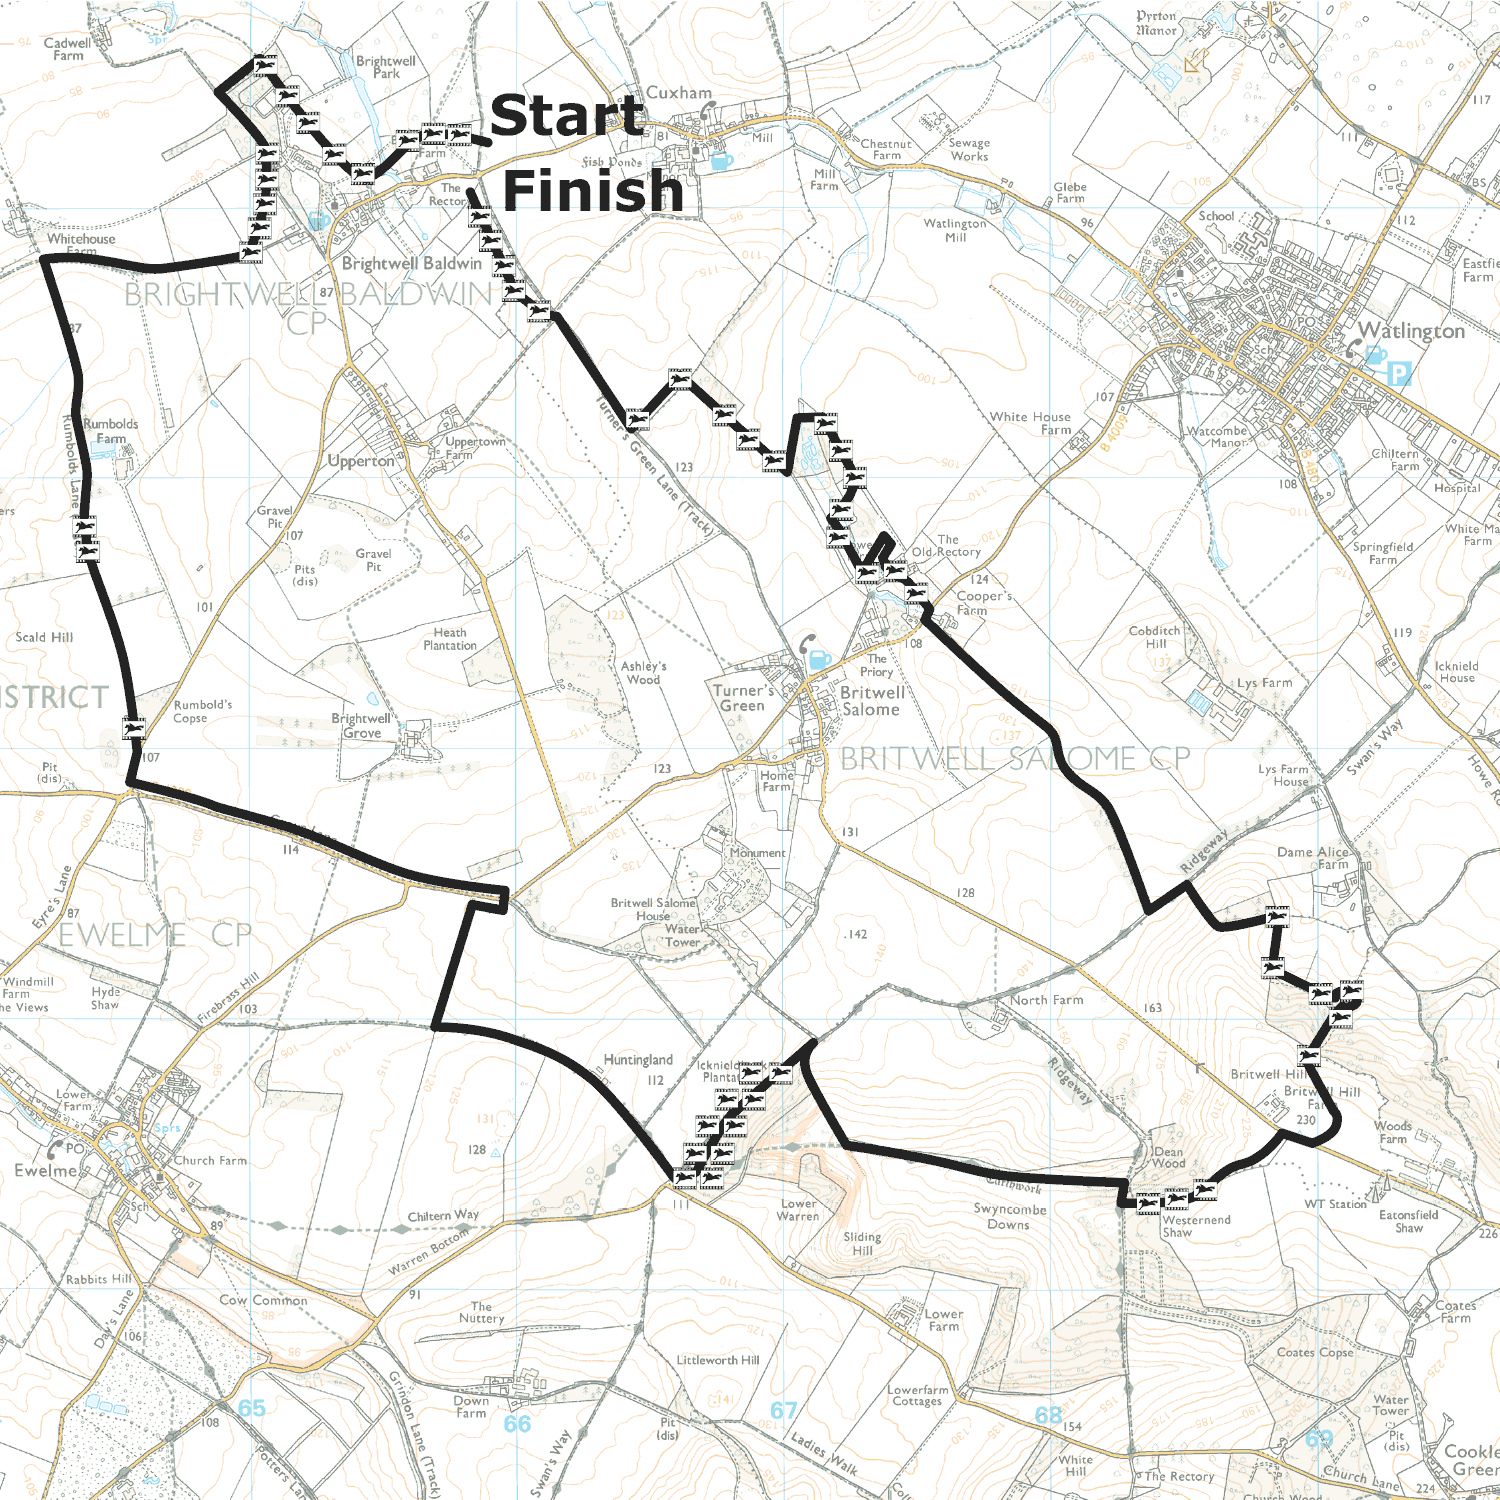 South Oxfordshire Sponsored Ride course map